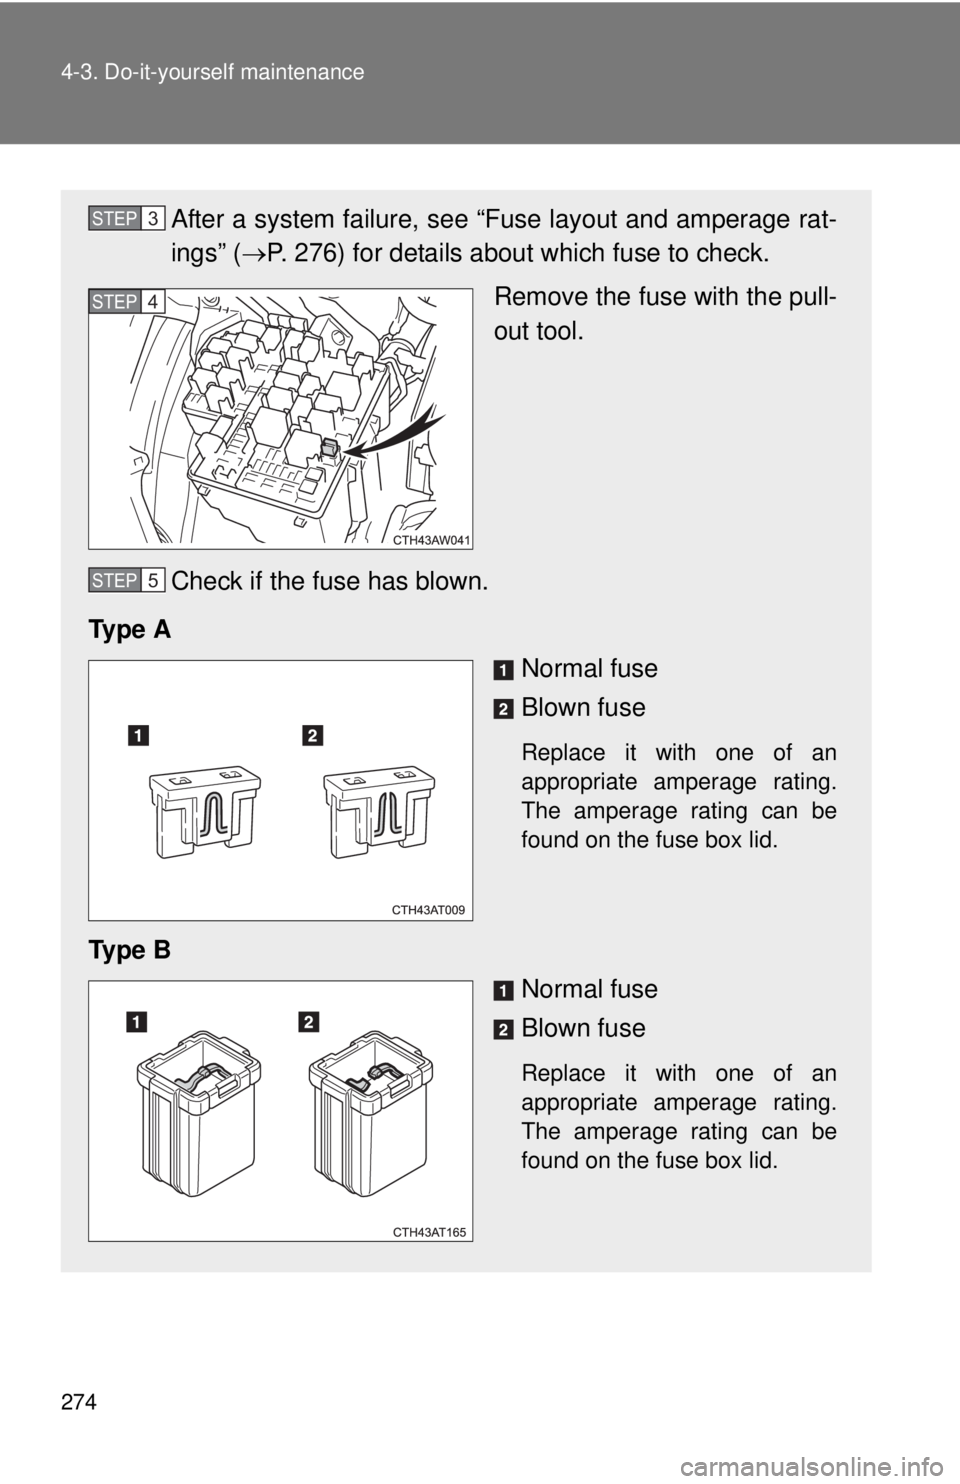 TOYOTA FR-S 2013  Owners Manual (in English) 274 4-3. Do-it-yourself maintenance
After a system failure, see “Fuse layout and amperage rat-
ings” (P. 276) for details about which fuse to check.
Remove the fuse with the pull-
out tool.
Che